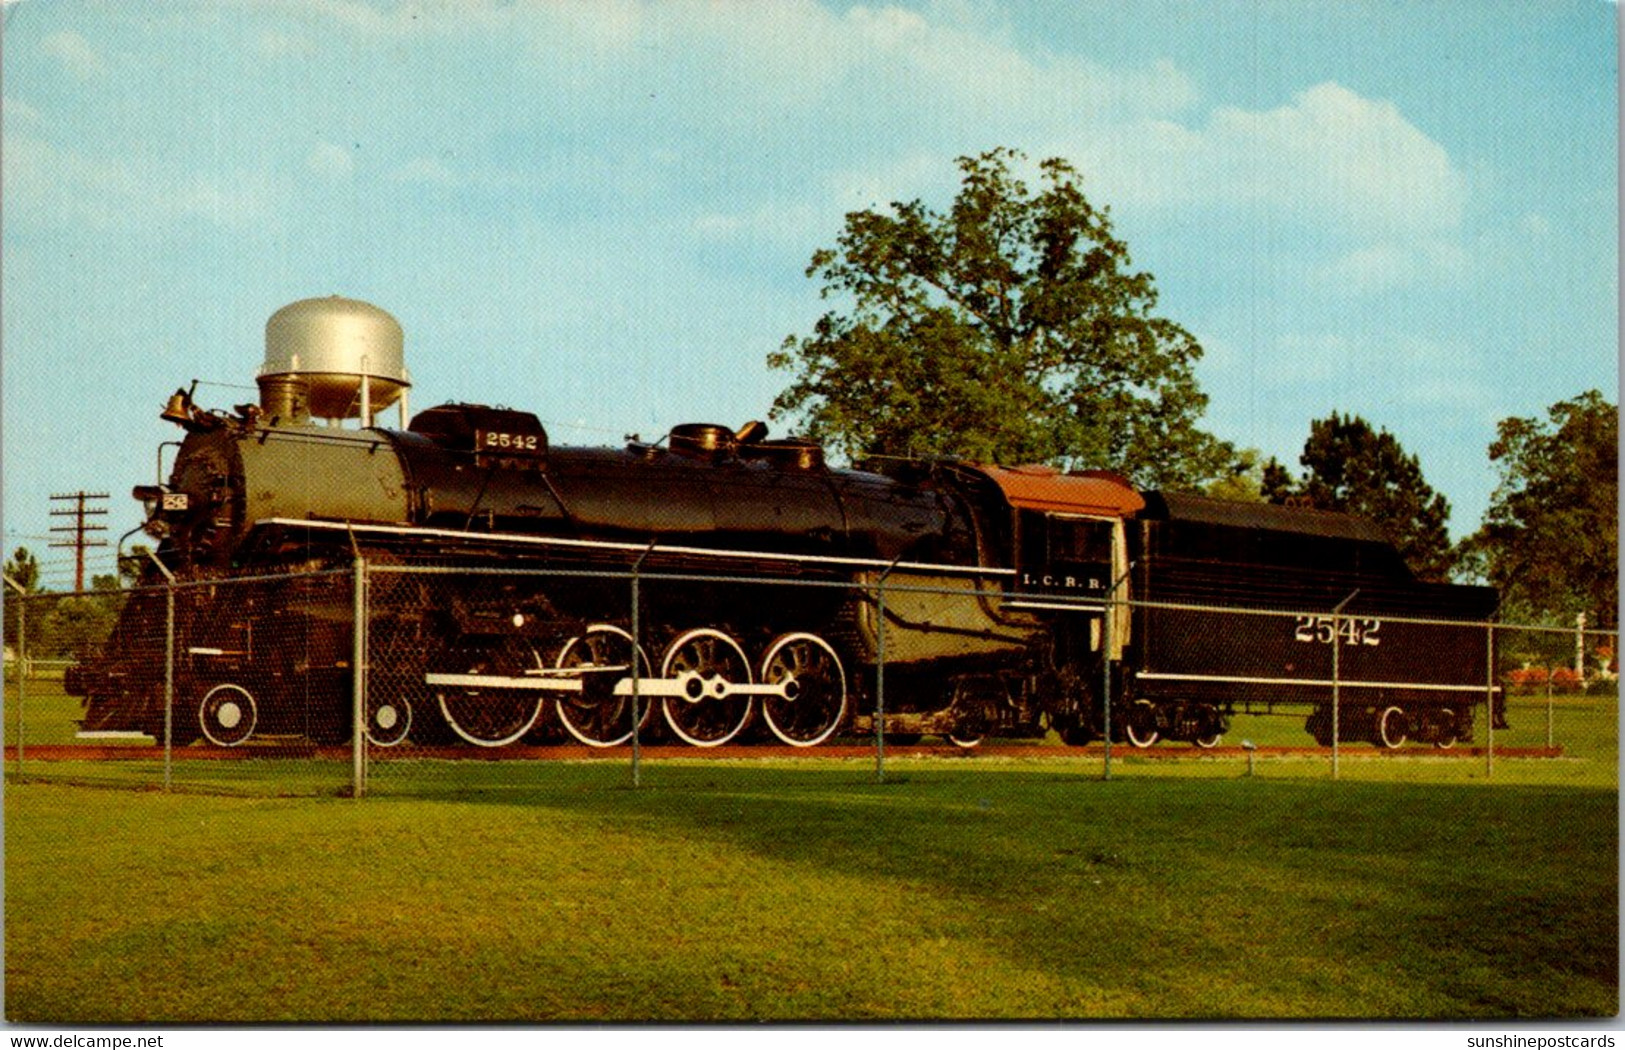 Mississippi McComb Edgewood City Park Locomotive No 2542 - Other & Unclassified